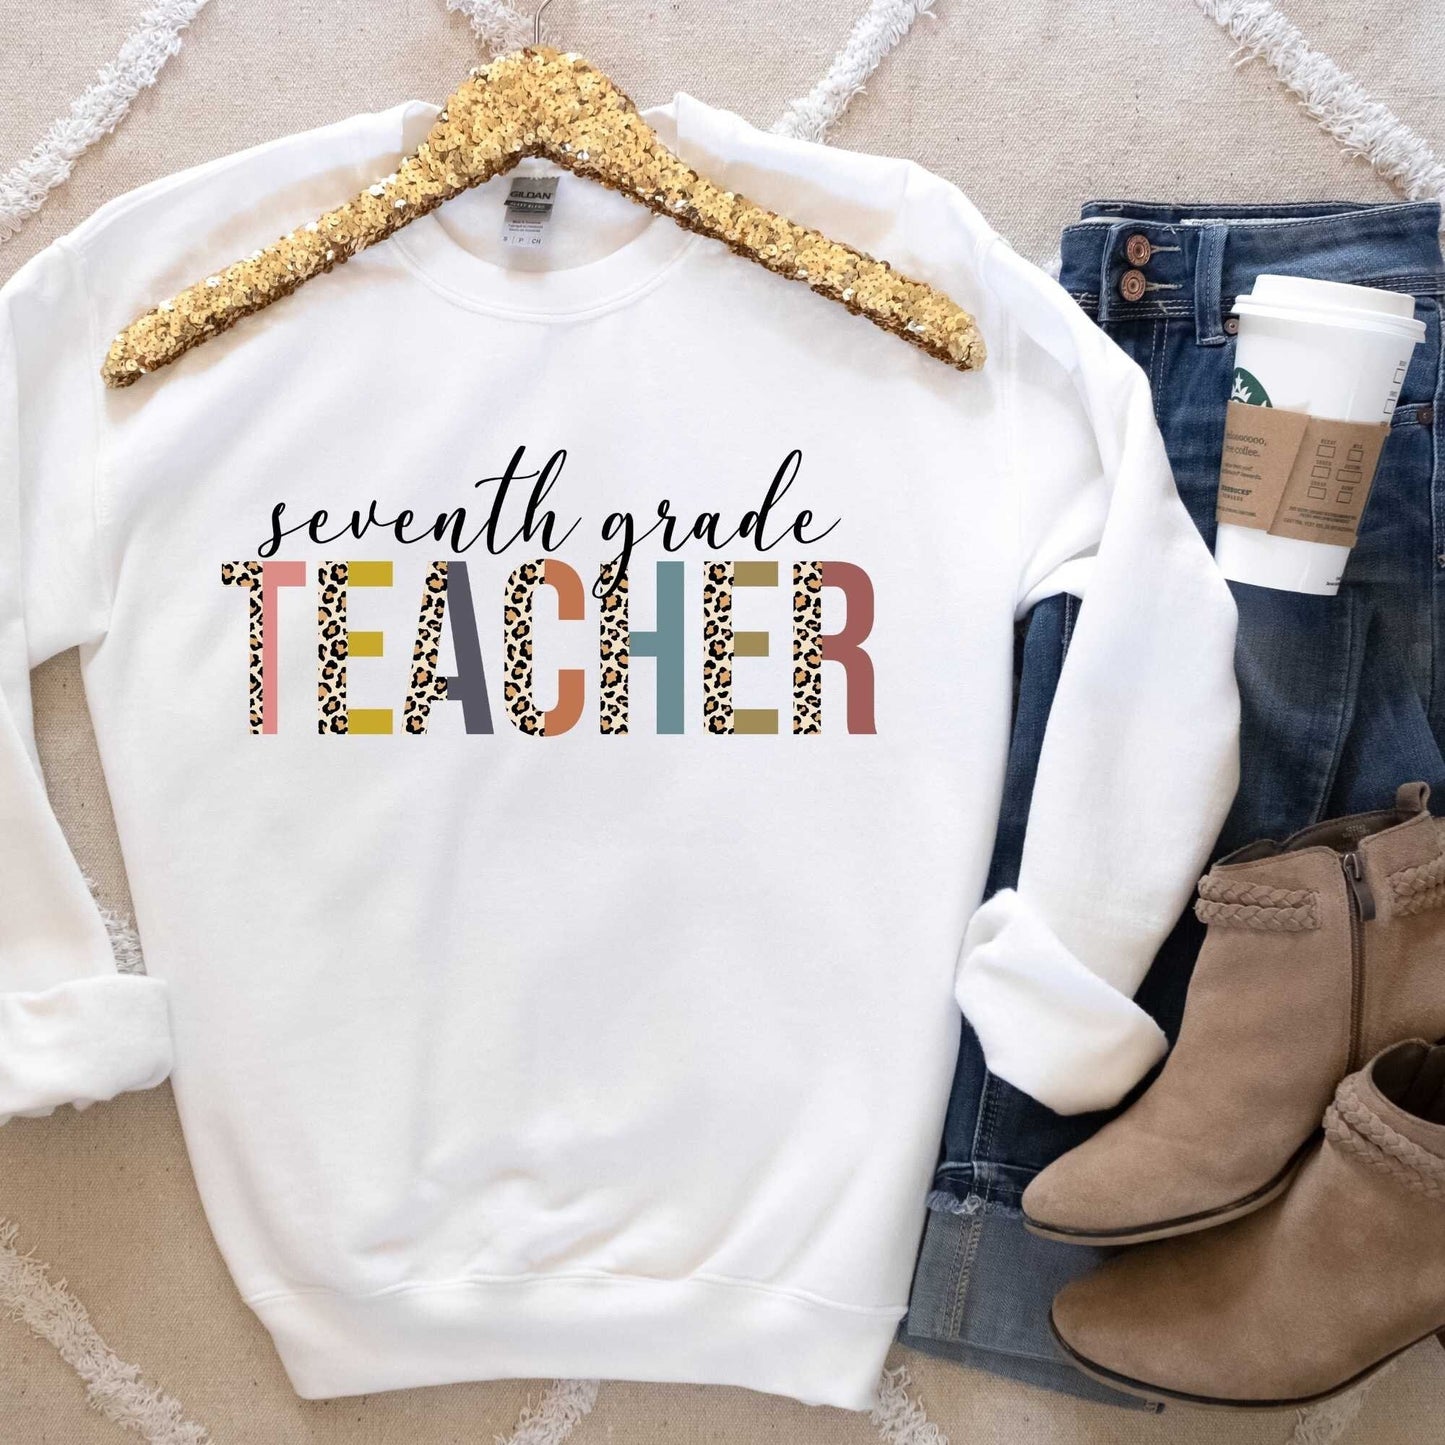 7th Grade Teacher Shirt | Great for New Middle School Team, Appreciation Gifts, Back to School, Holiday Celebration, Christmas Presents Gift HMDesignStudioUS